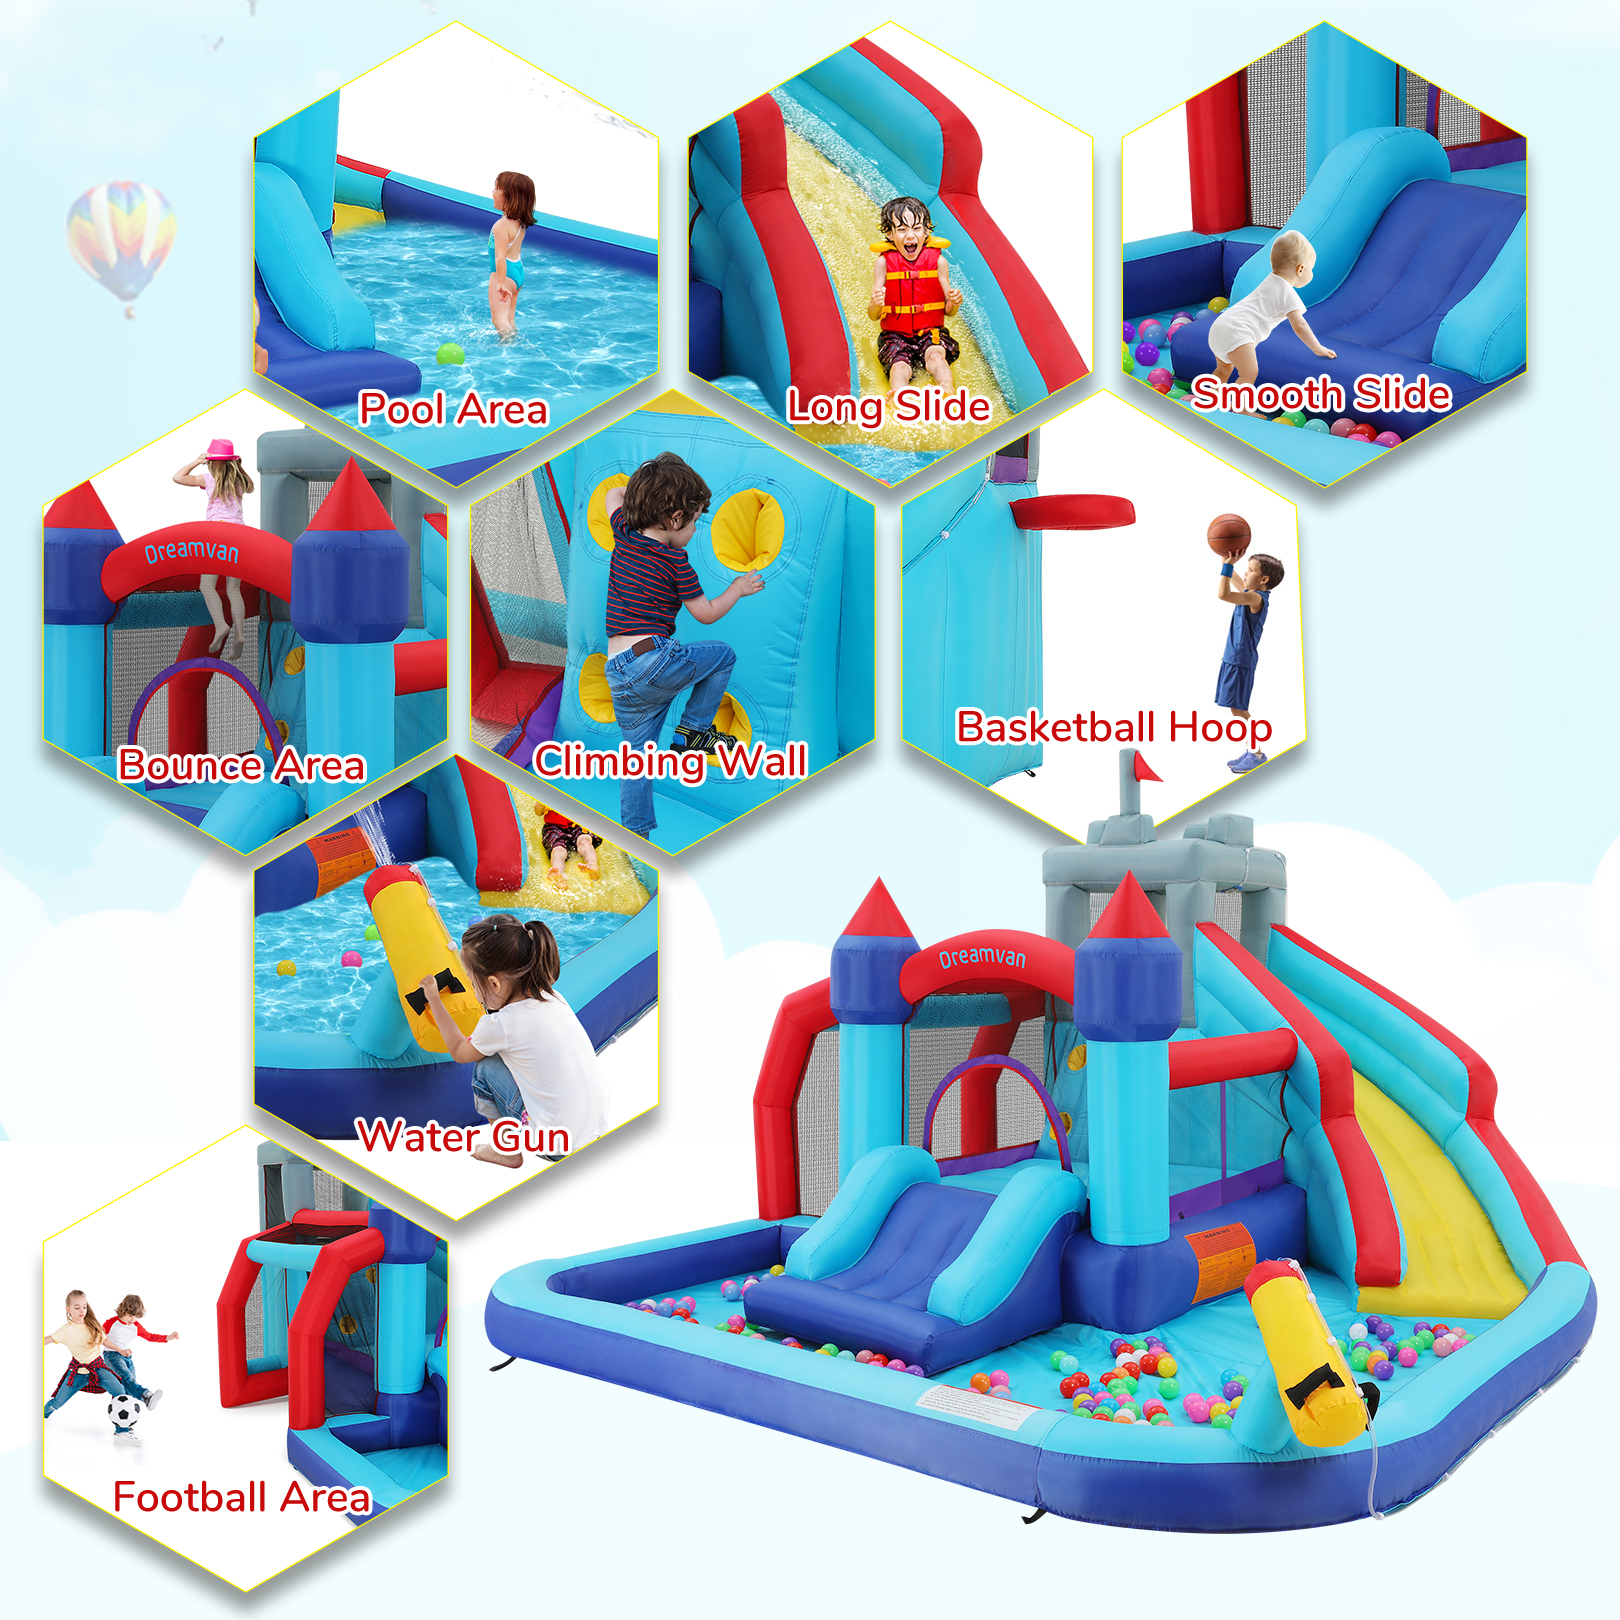 Qhomic Inflatable Bounce House for Toddlers with Blower, Children's Castle with Bouncing Slides, Climbing Wall, Bouncing Area, Basketball Hoop, Water Gun, Inflatable Water Slide with Football Area - image 4 of 12